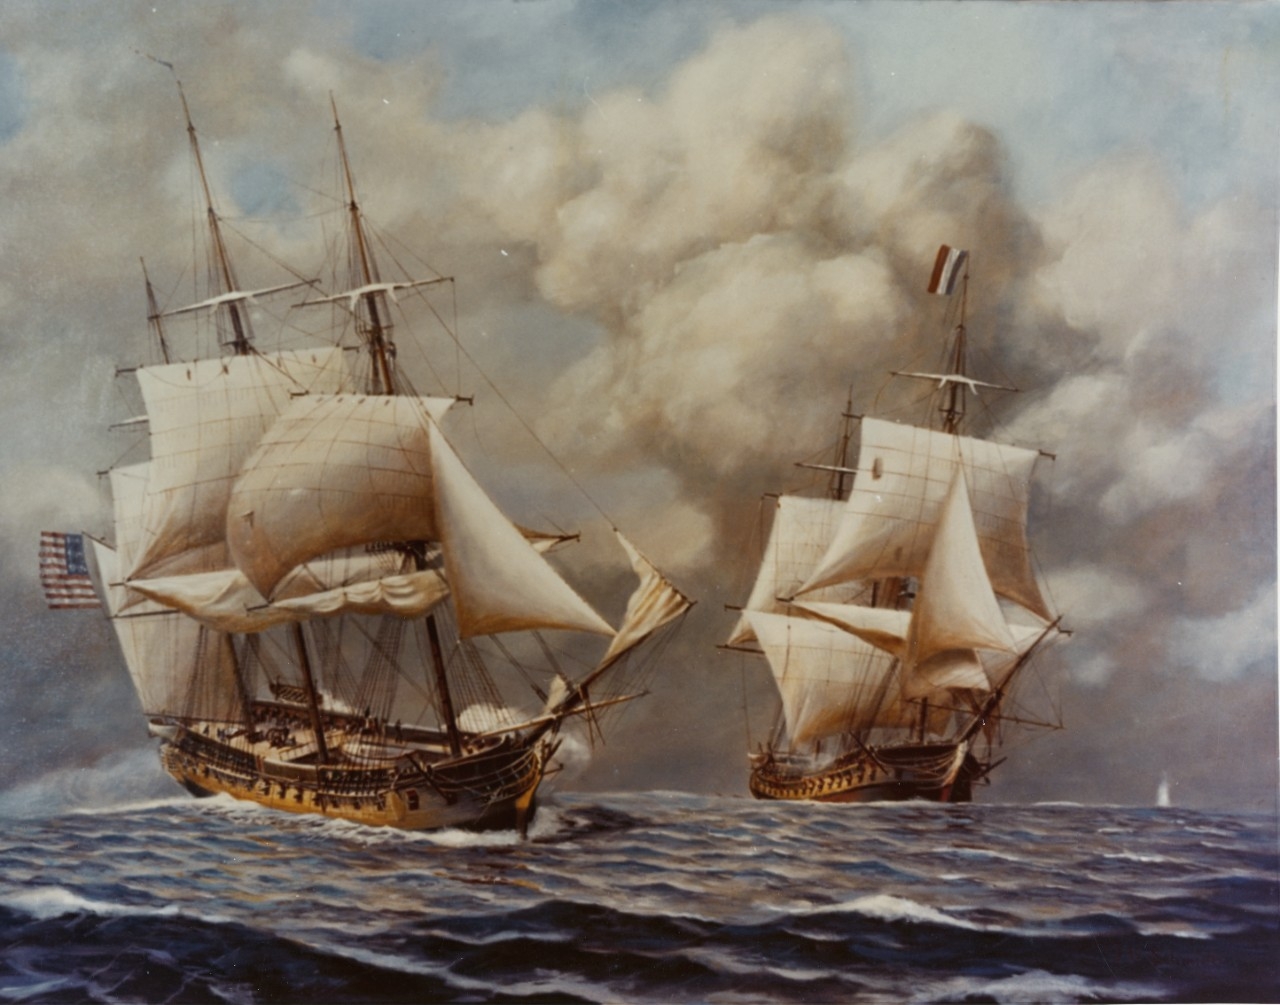 Action between U.S. frigate Constellation and French frigate L’Insurgente, 9 February 1799